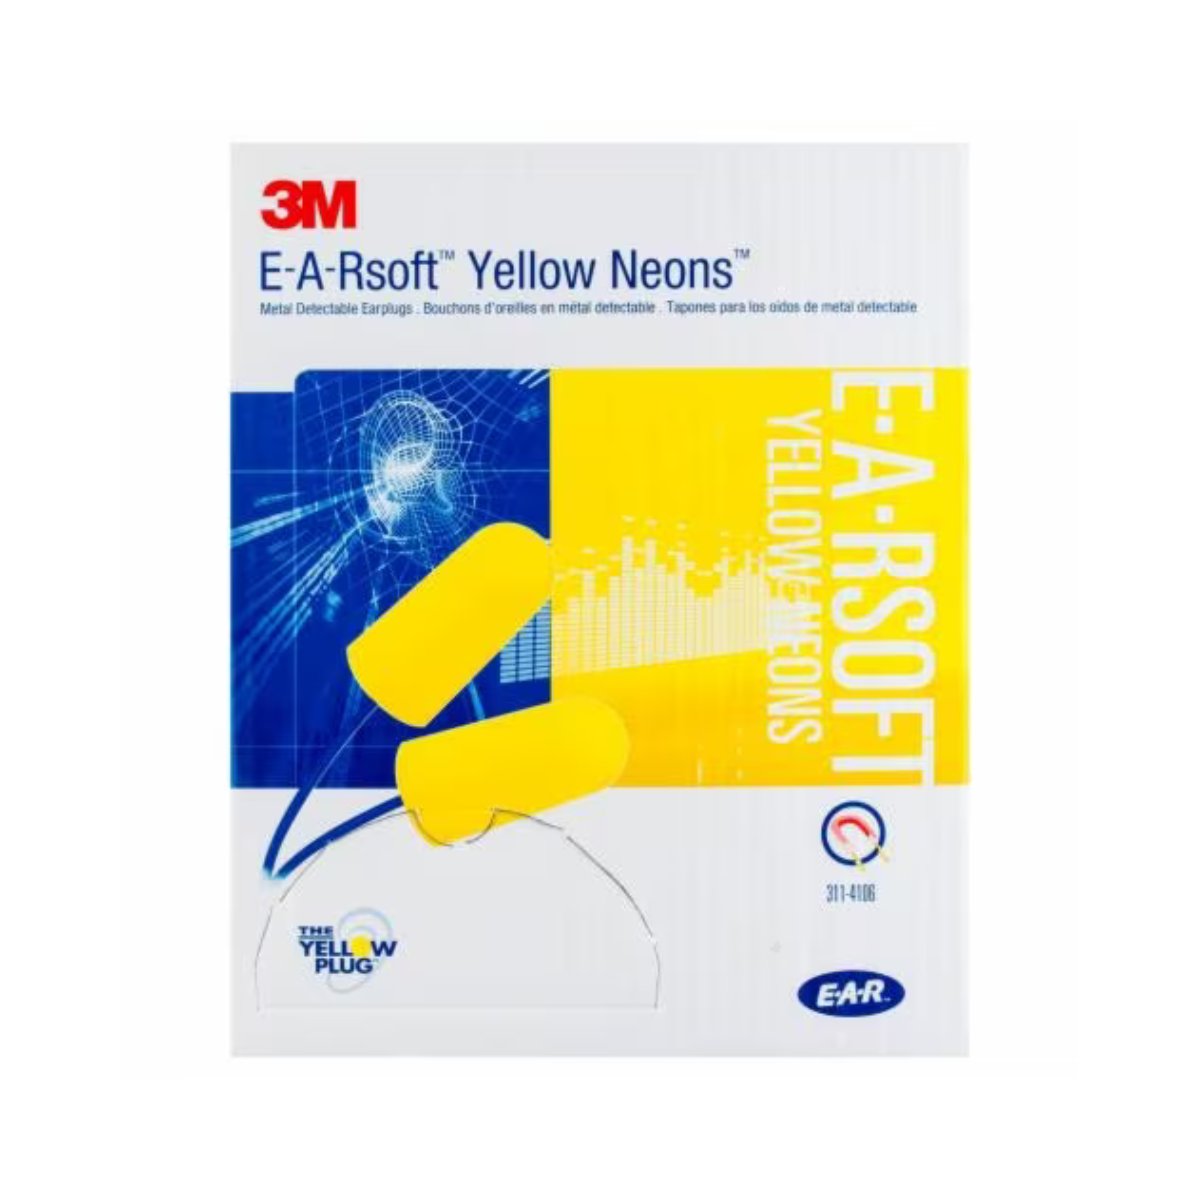 3M™ E-A-Rsoft™ Metal Detectable Corded Earplugs, Poly Bag, 311-4106 - 23dB (Class 4) (Box of 200 Pairs)